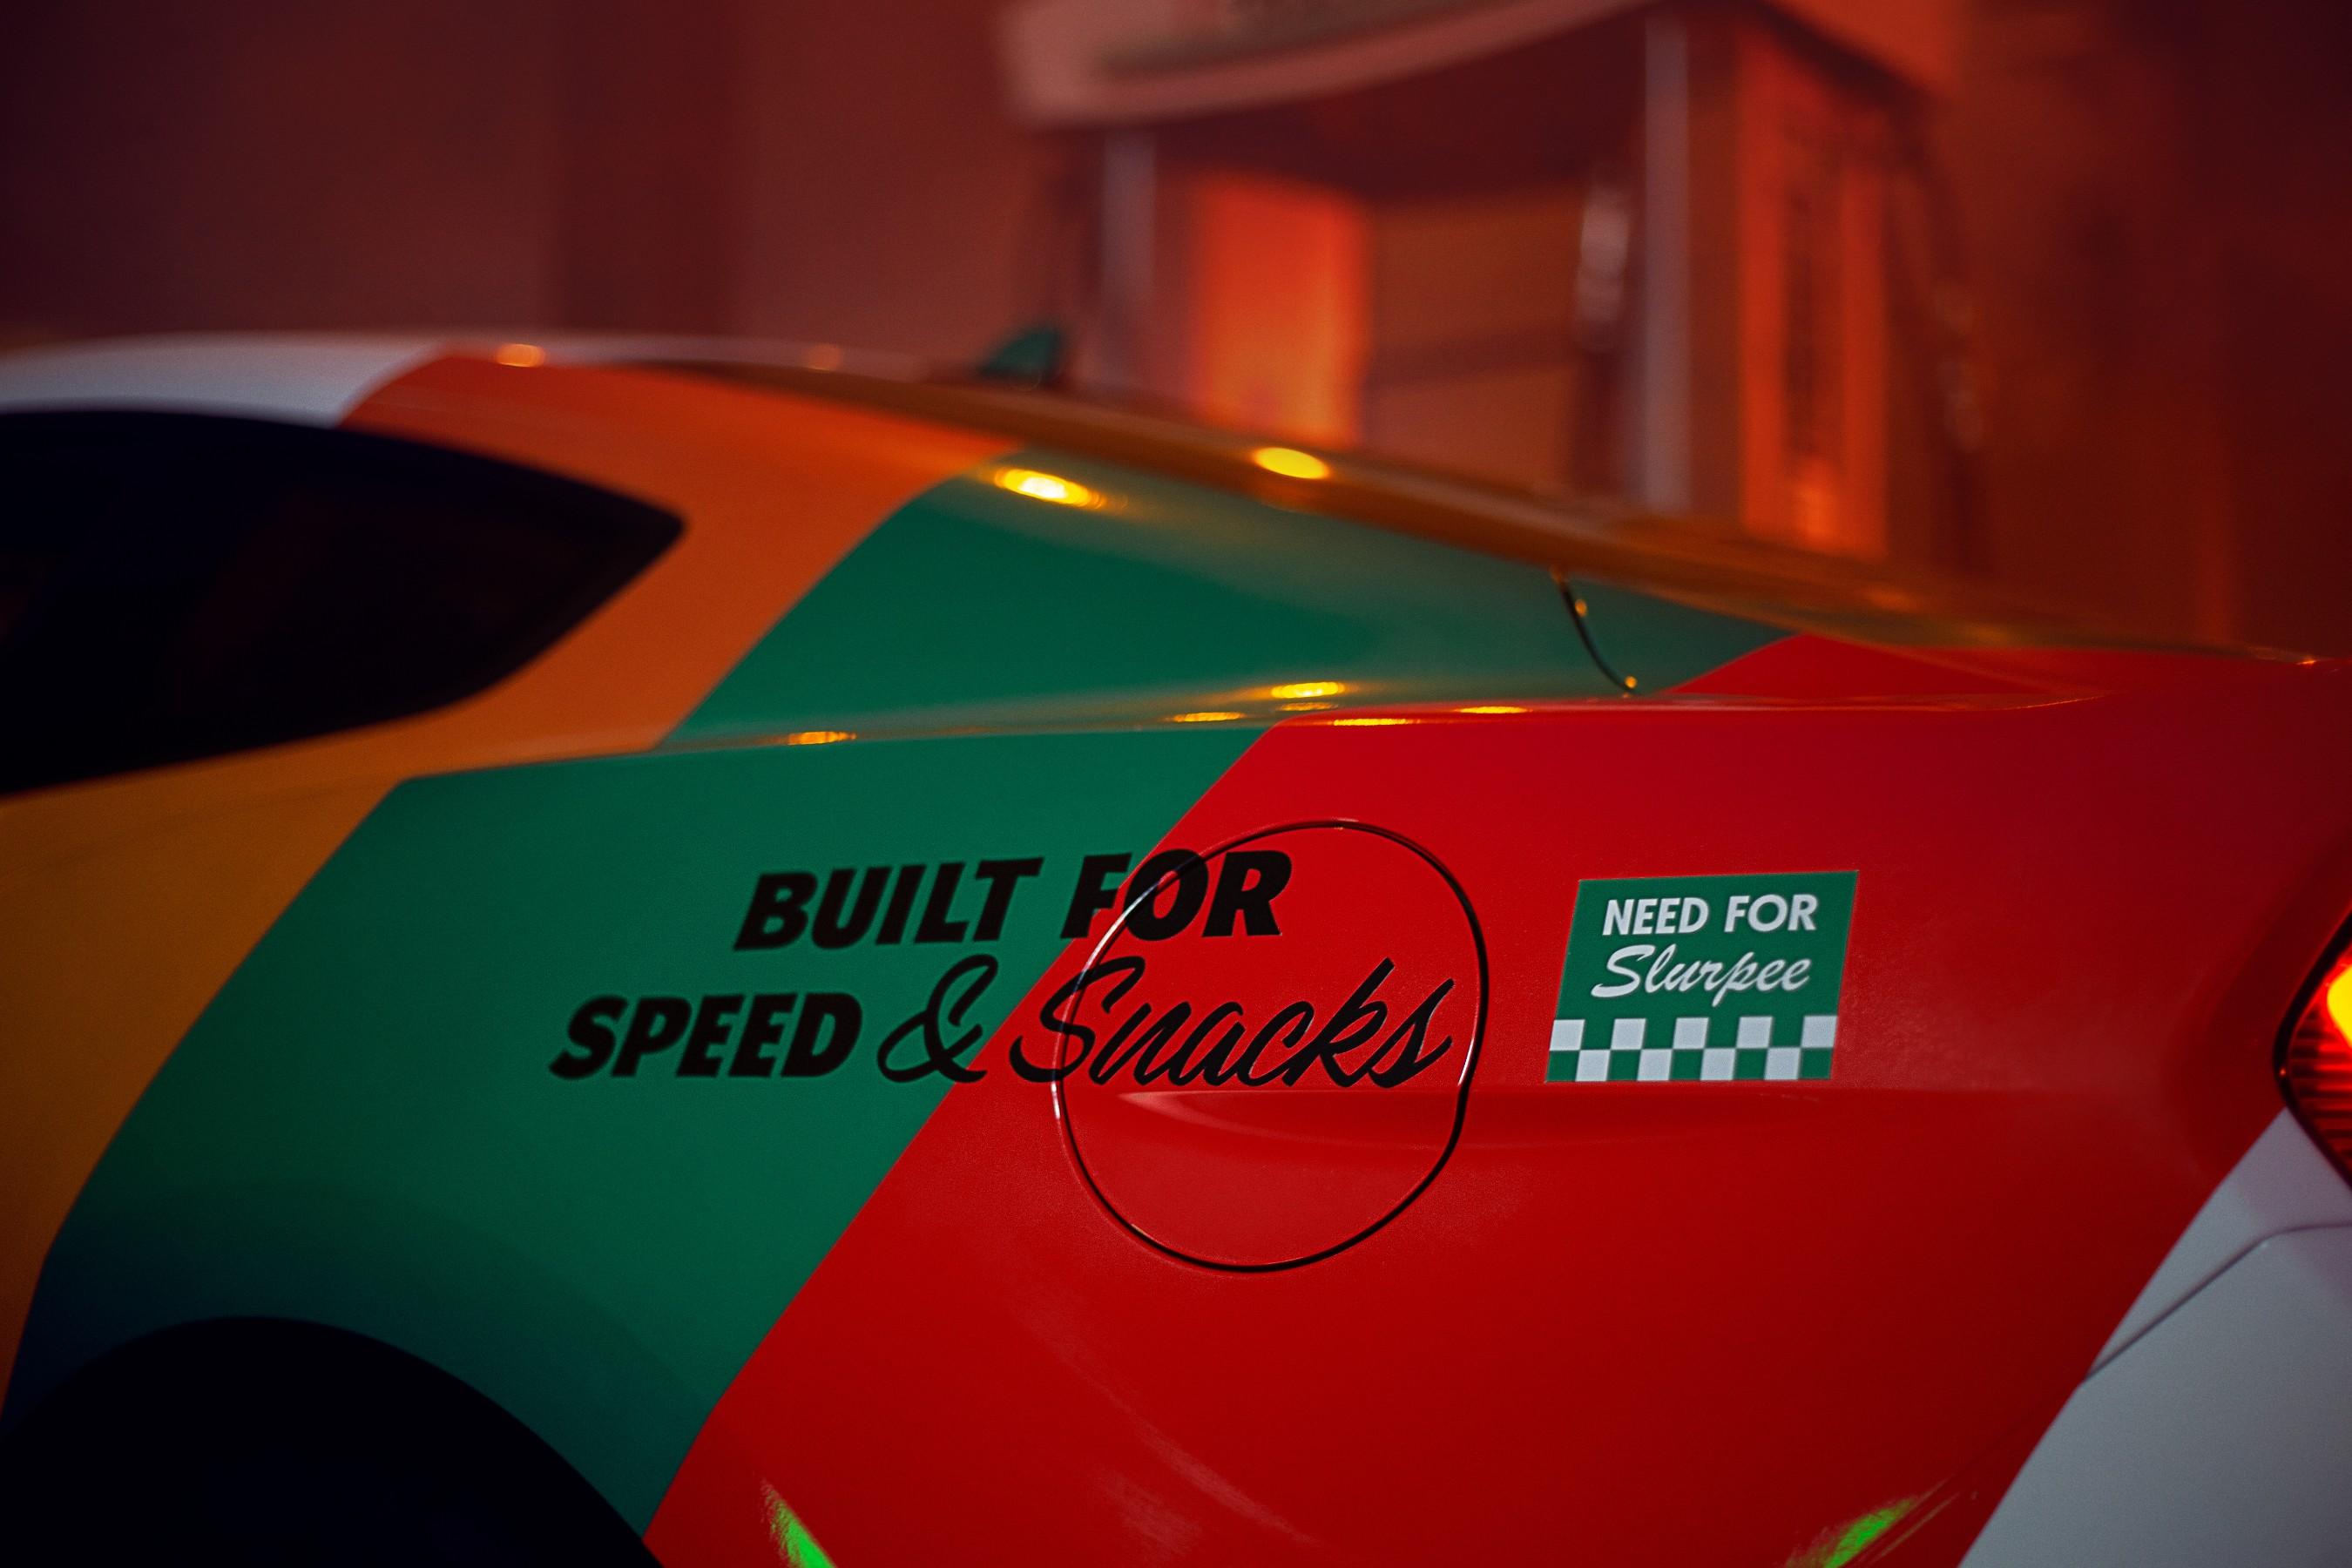 "Built for Speed and Snacks" and "Need for Slurpee" written next to the gas of the 7-11 customized Mustang.